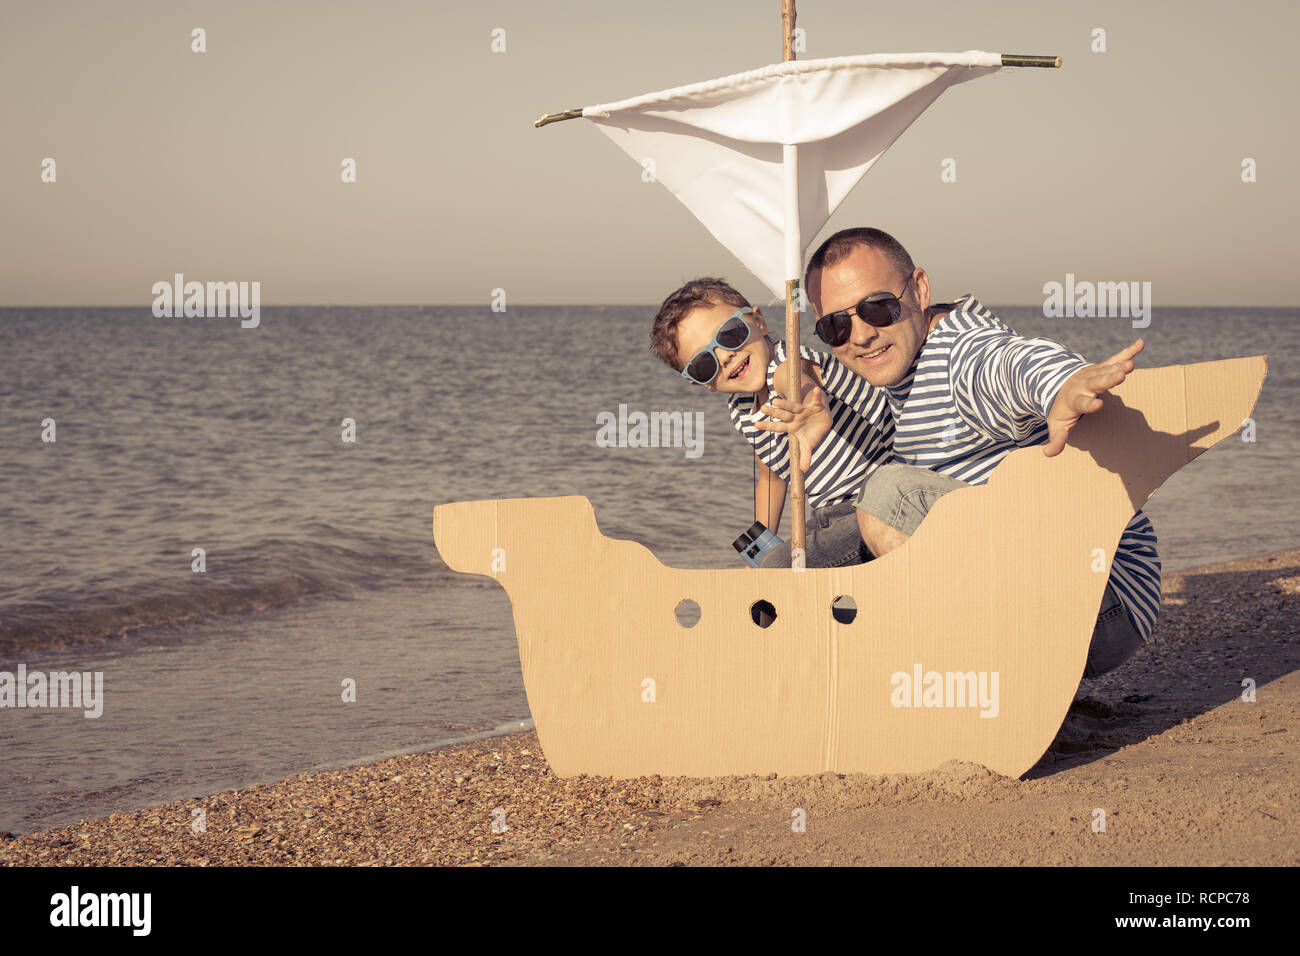 Father and son playing on the beach at the day time. They are dressed in sailor's vests. Concept of sailors on vacation and friendly family. Stock Photo